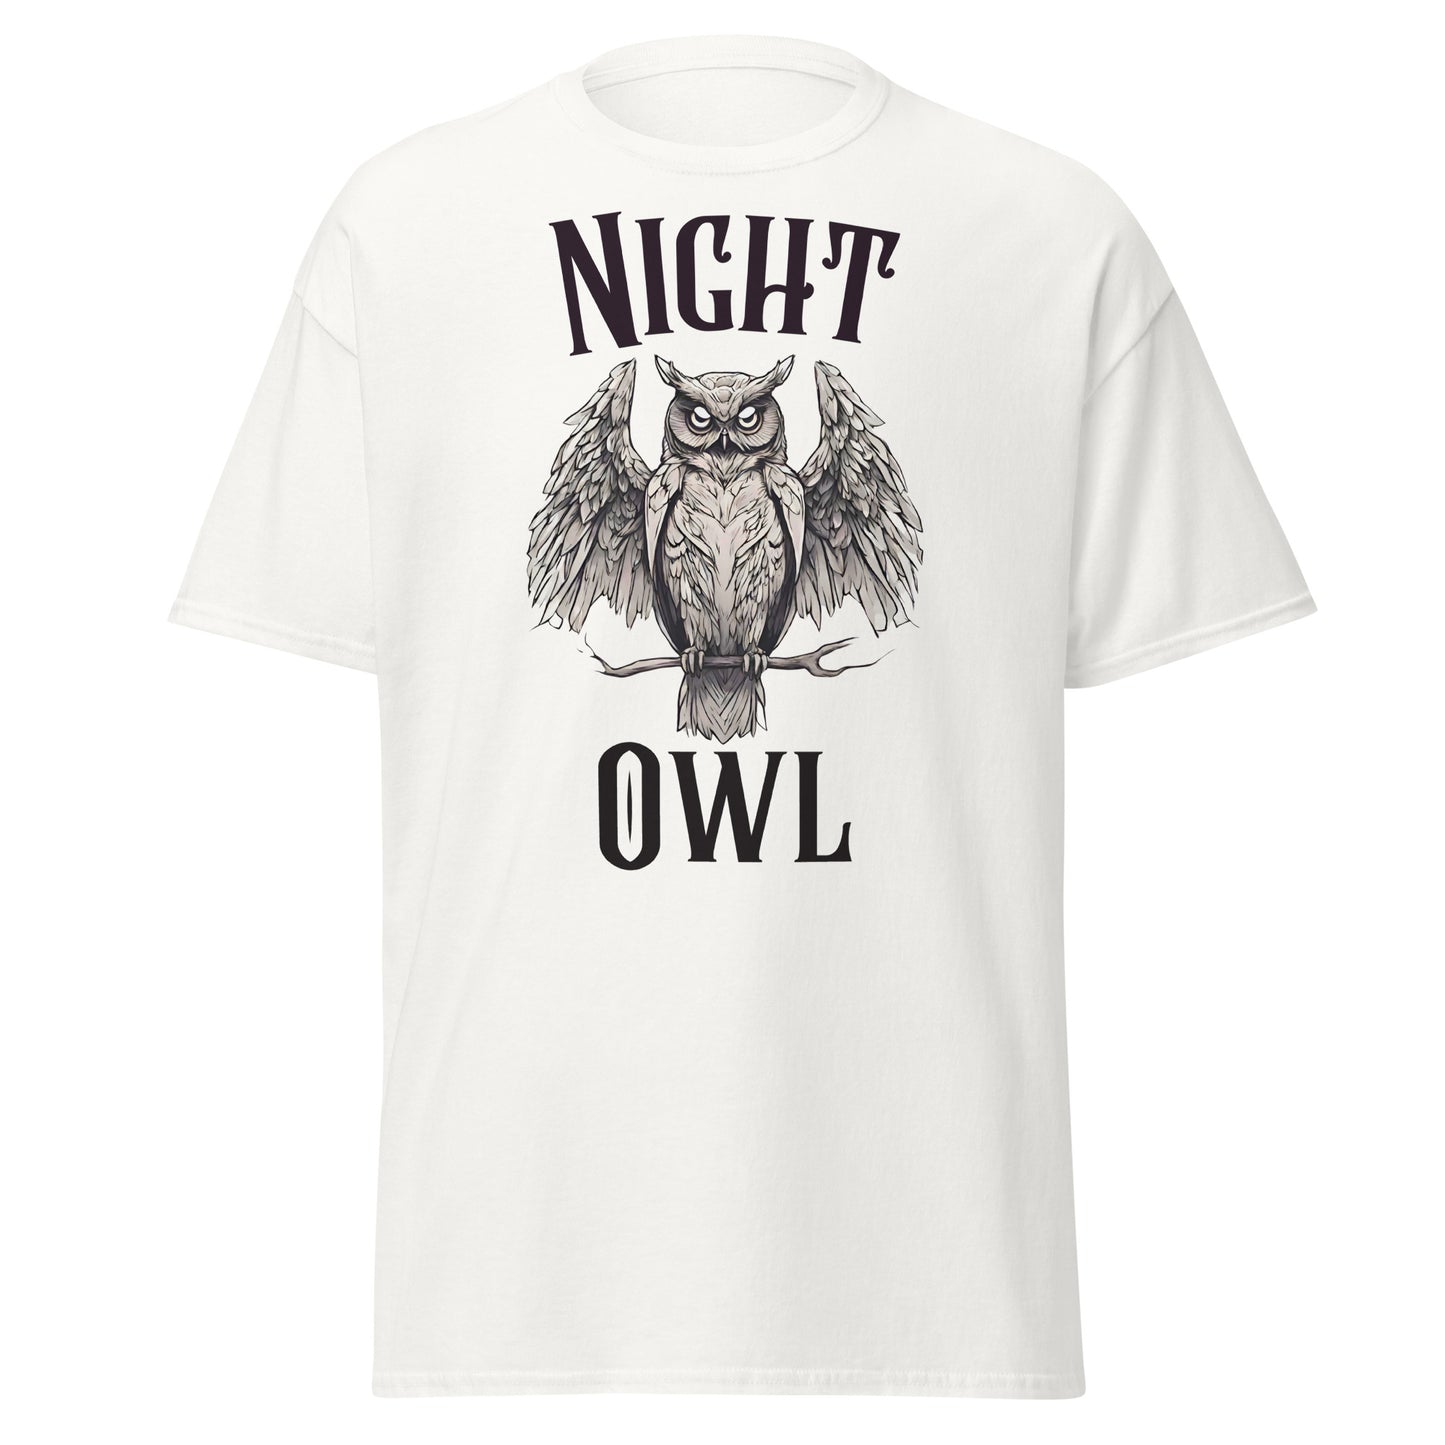 Graphic Night Owl: Stylish Tee for the Nocturnal - Men's classic tee Apparel